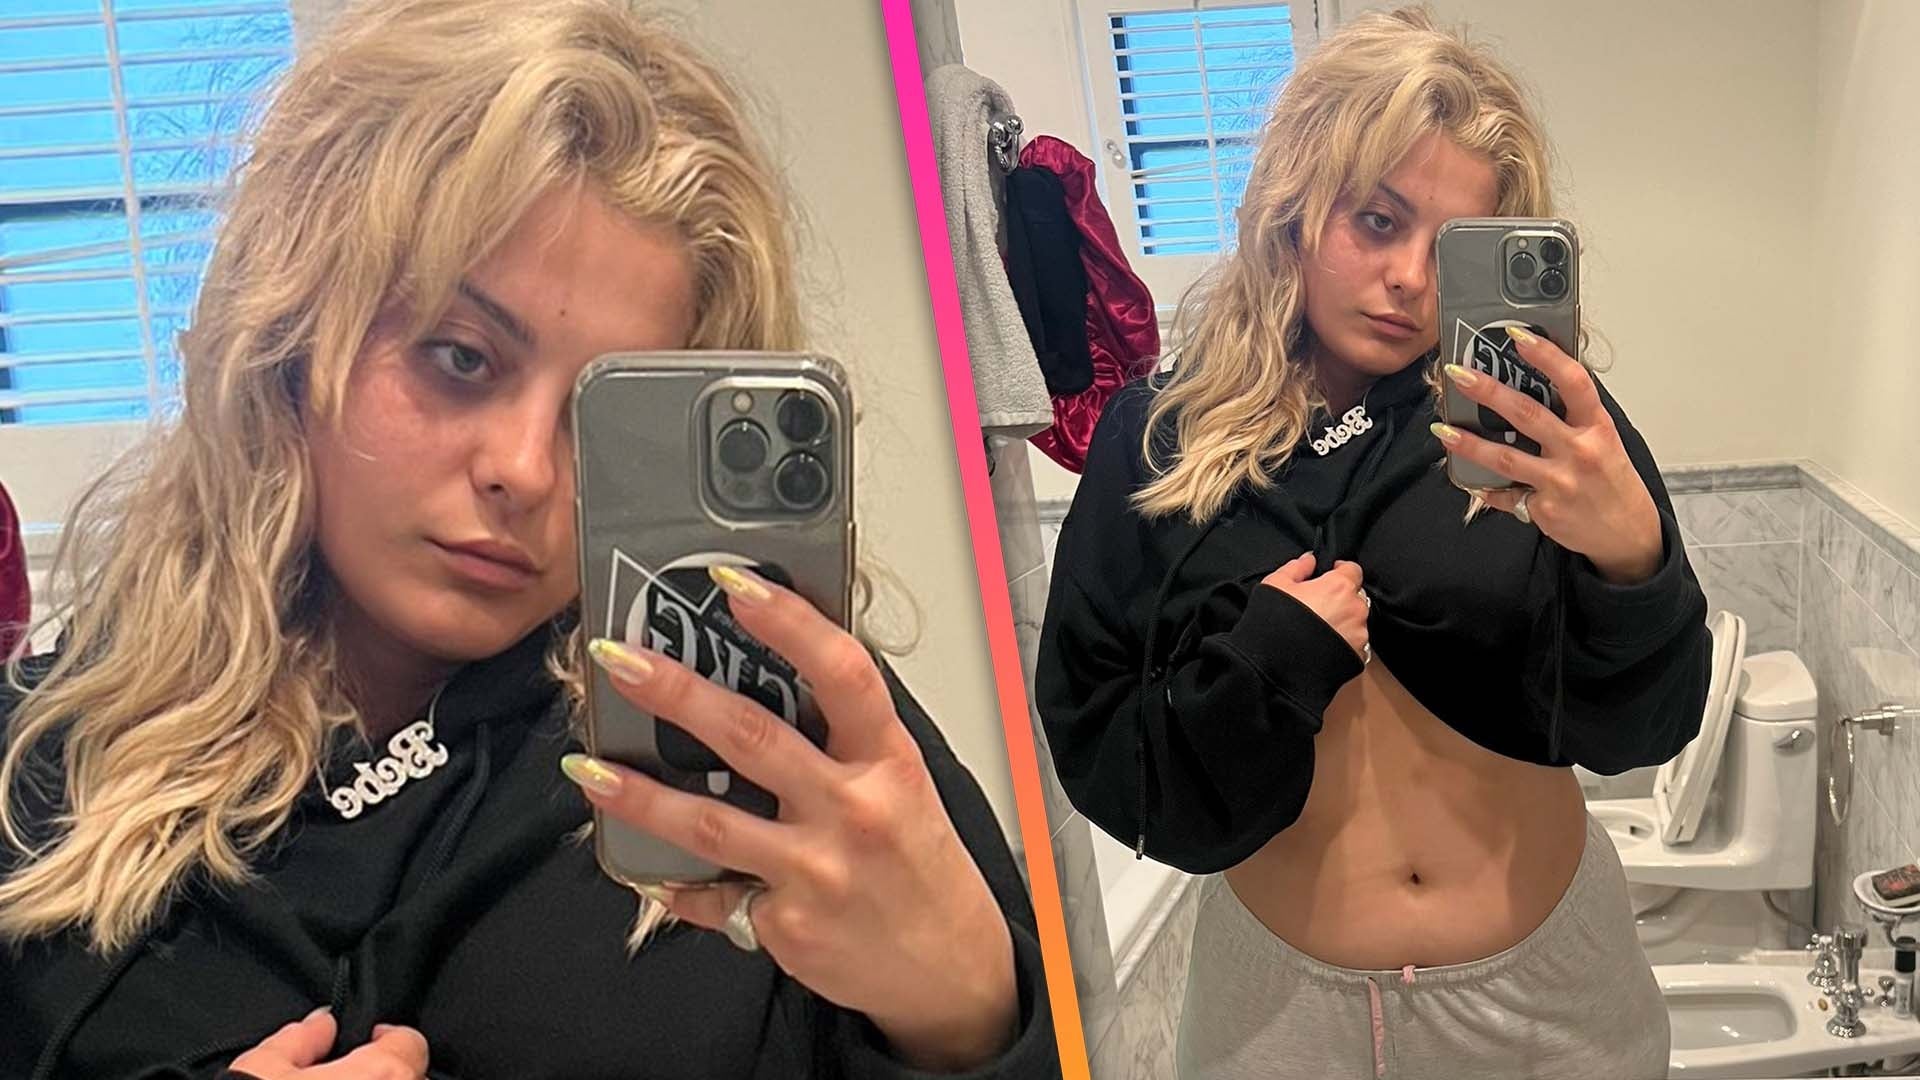 Bebe Rexha Declares She's in Her 'Fat Era' as Clapback to Body-Shaming Comments